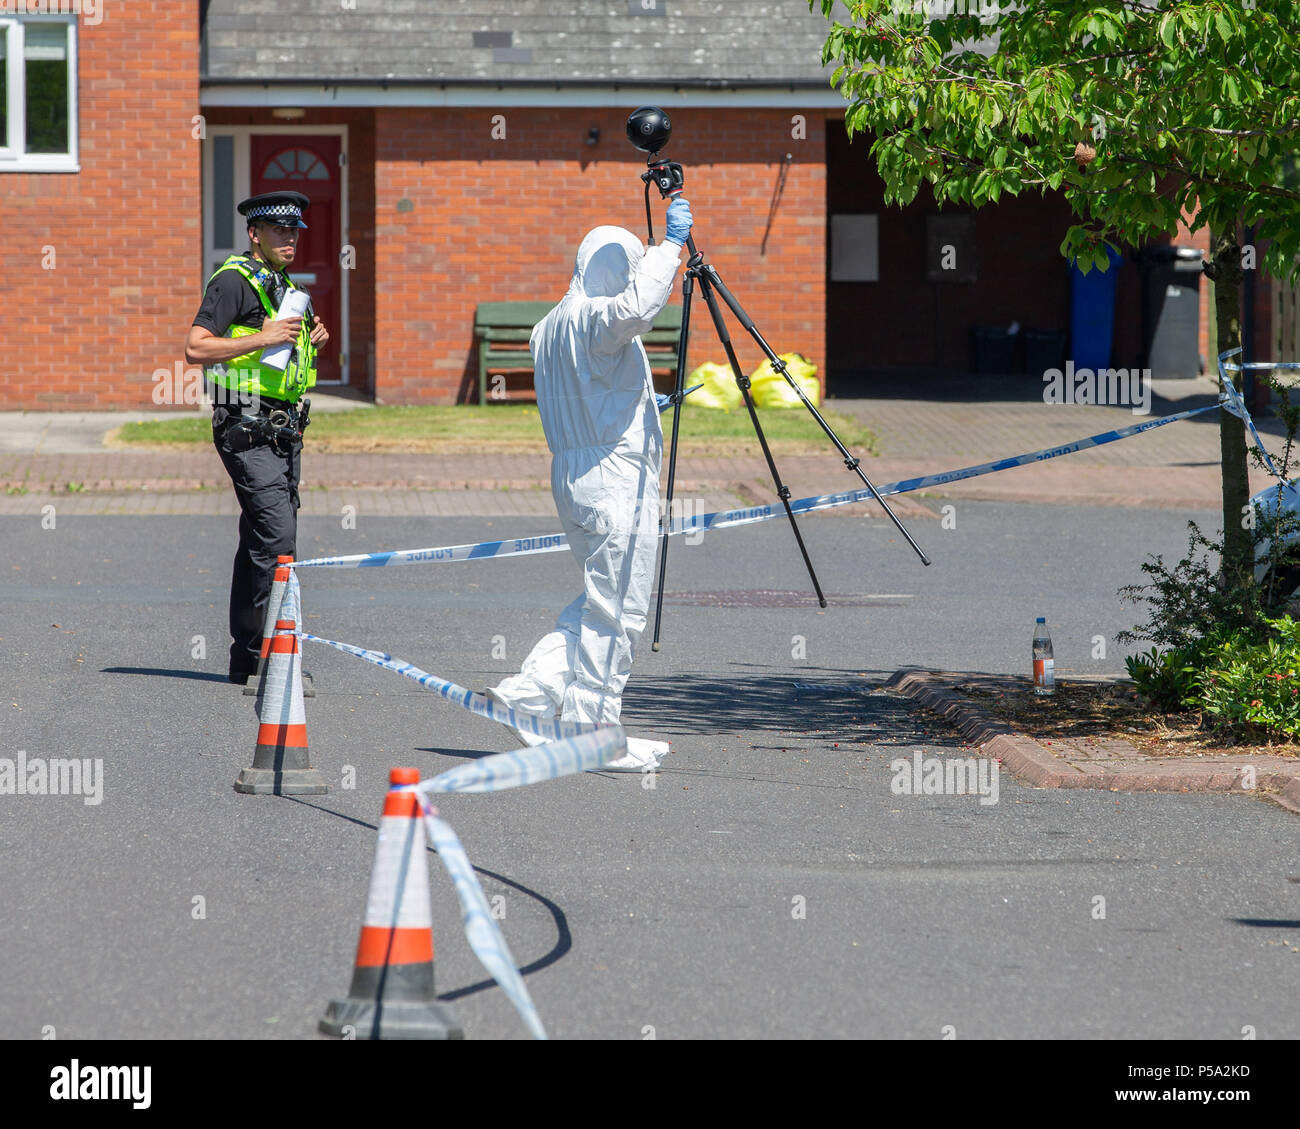 Steven Close, Chapeltown, Sheffield, UK. Friday 26th June 2018 , Steven Close, Chapeltown, Sheffield, UK; The body of a fatally injured man was found in a house in Steven Close, Chapeltown, at 12.30am and a police probe is now under way, The house has been sealed off and is under police guard while forensic experts examine the scene and surrounding streets;CSI officers prepare to enter the property with 3D imagery equipment to map the murder scene Credit: News Images /Alamy Live News Stock Photo